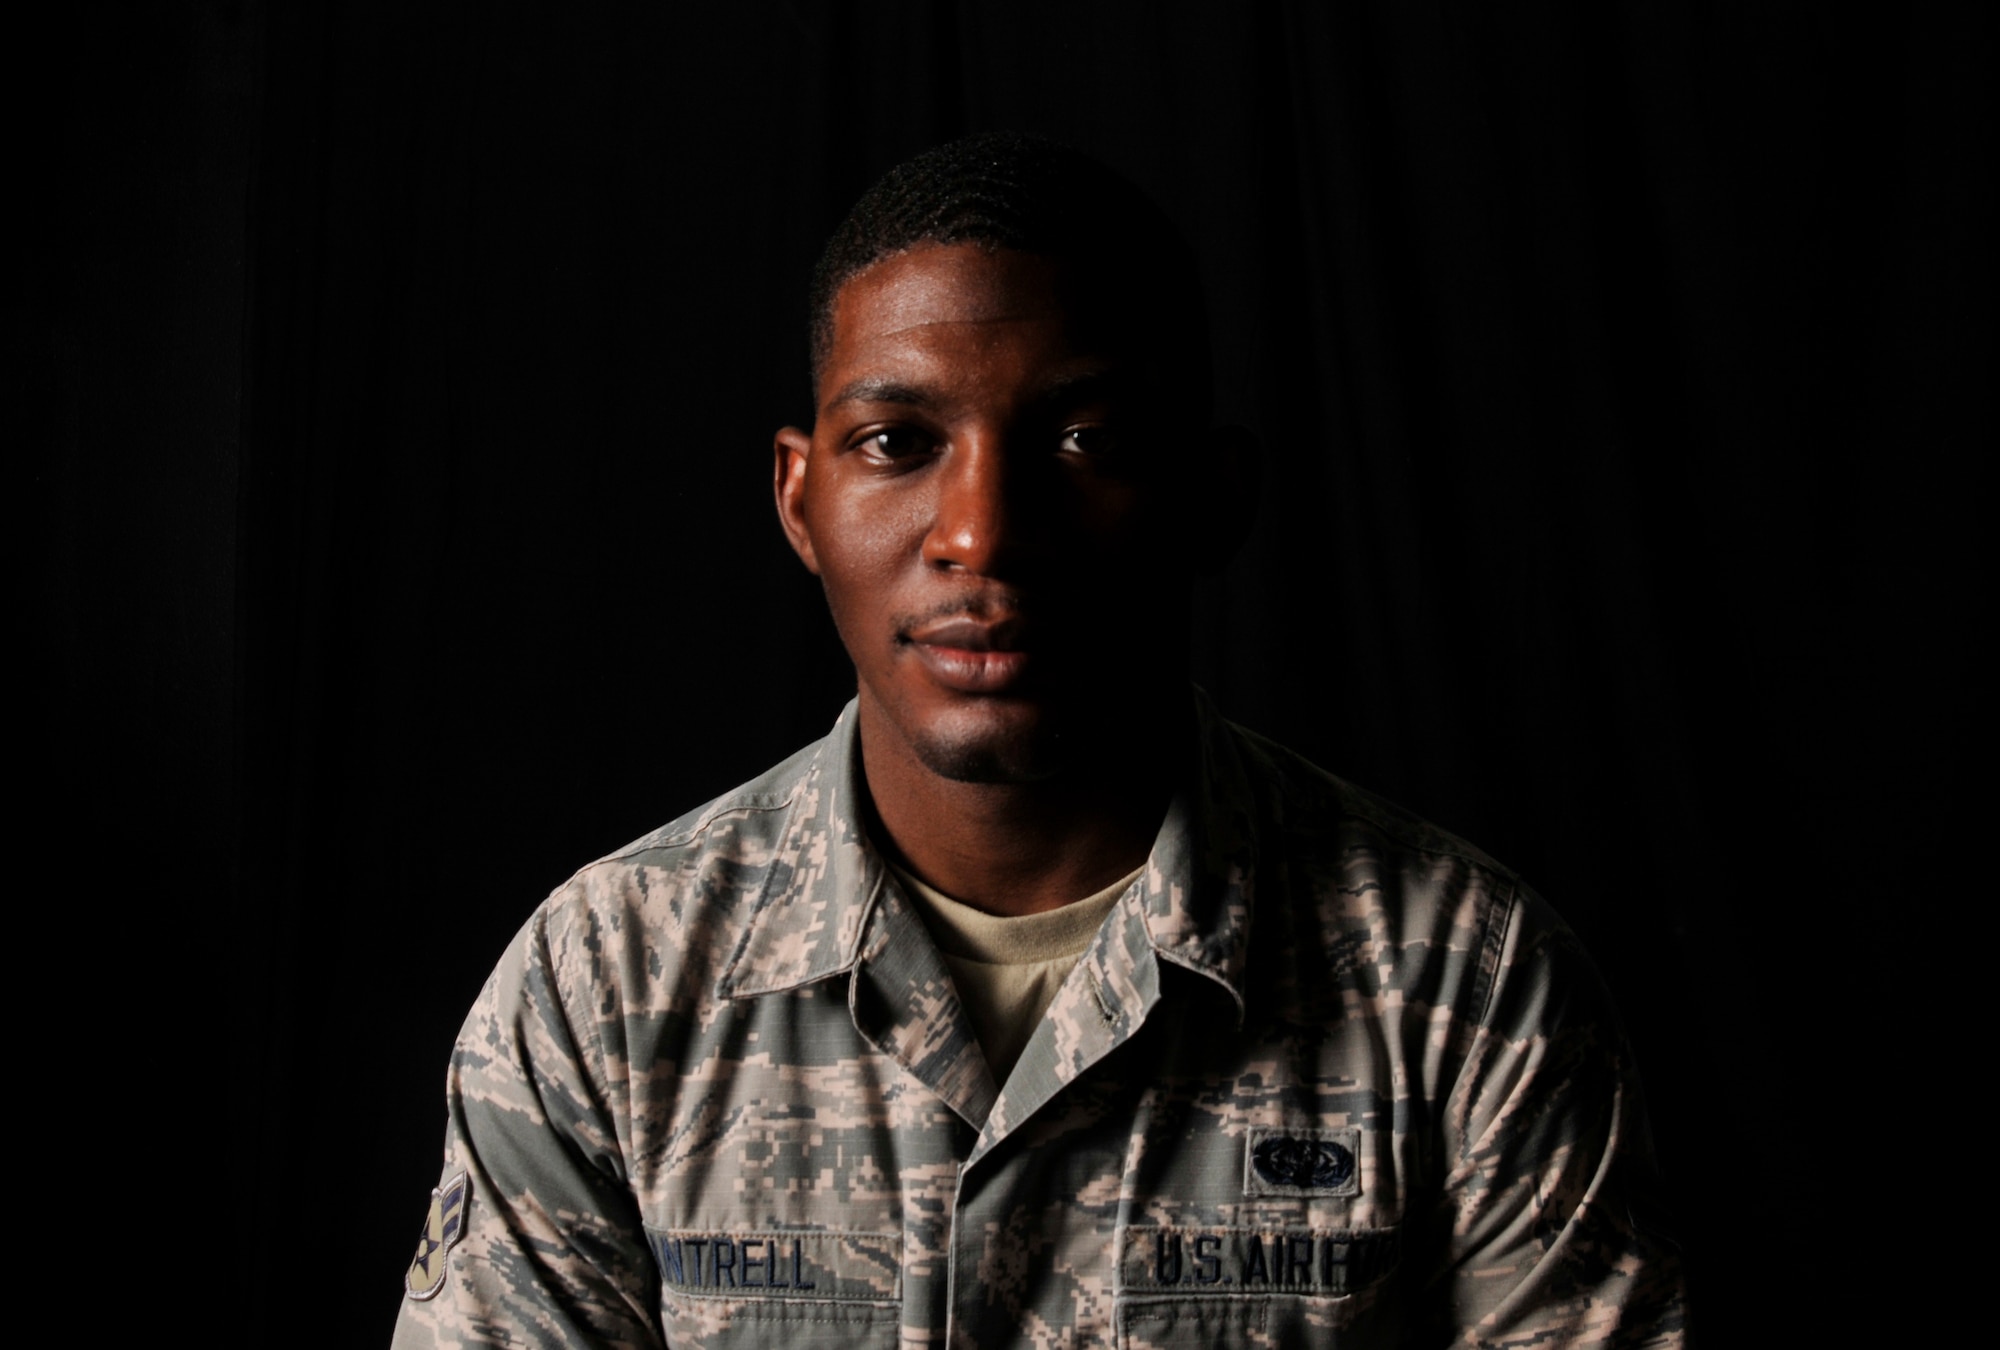 Airman 1st Class Leonard Cantrell Jr., an executive communications technician with the 18th Communications Squadron, helped save the lives of a woman and her child while swimming in Okinawa, Japan. (U.S. Air Force photo by Staff Sgt. Daryn Murphy)